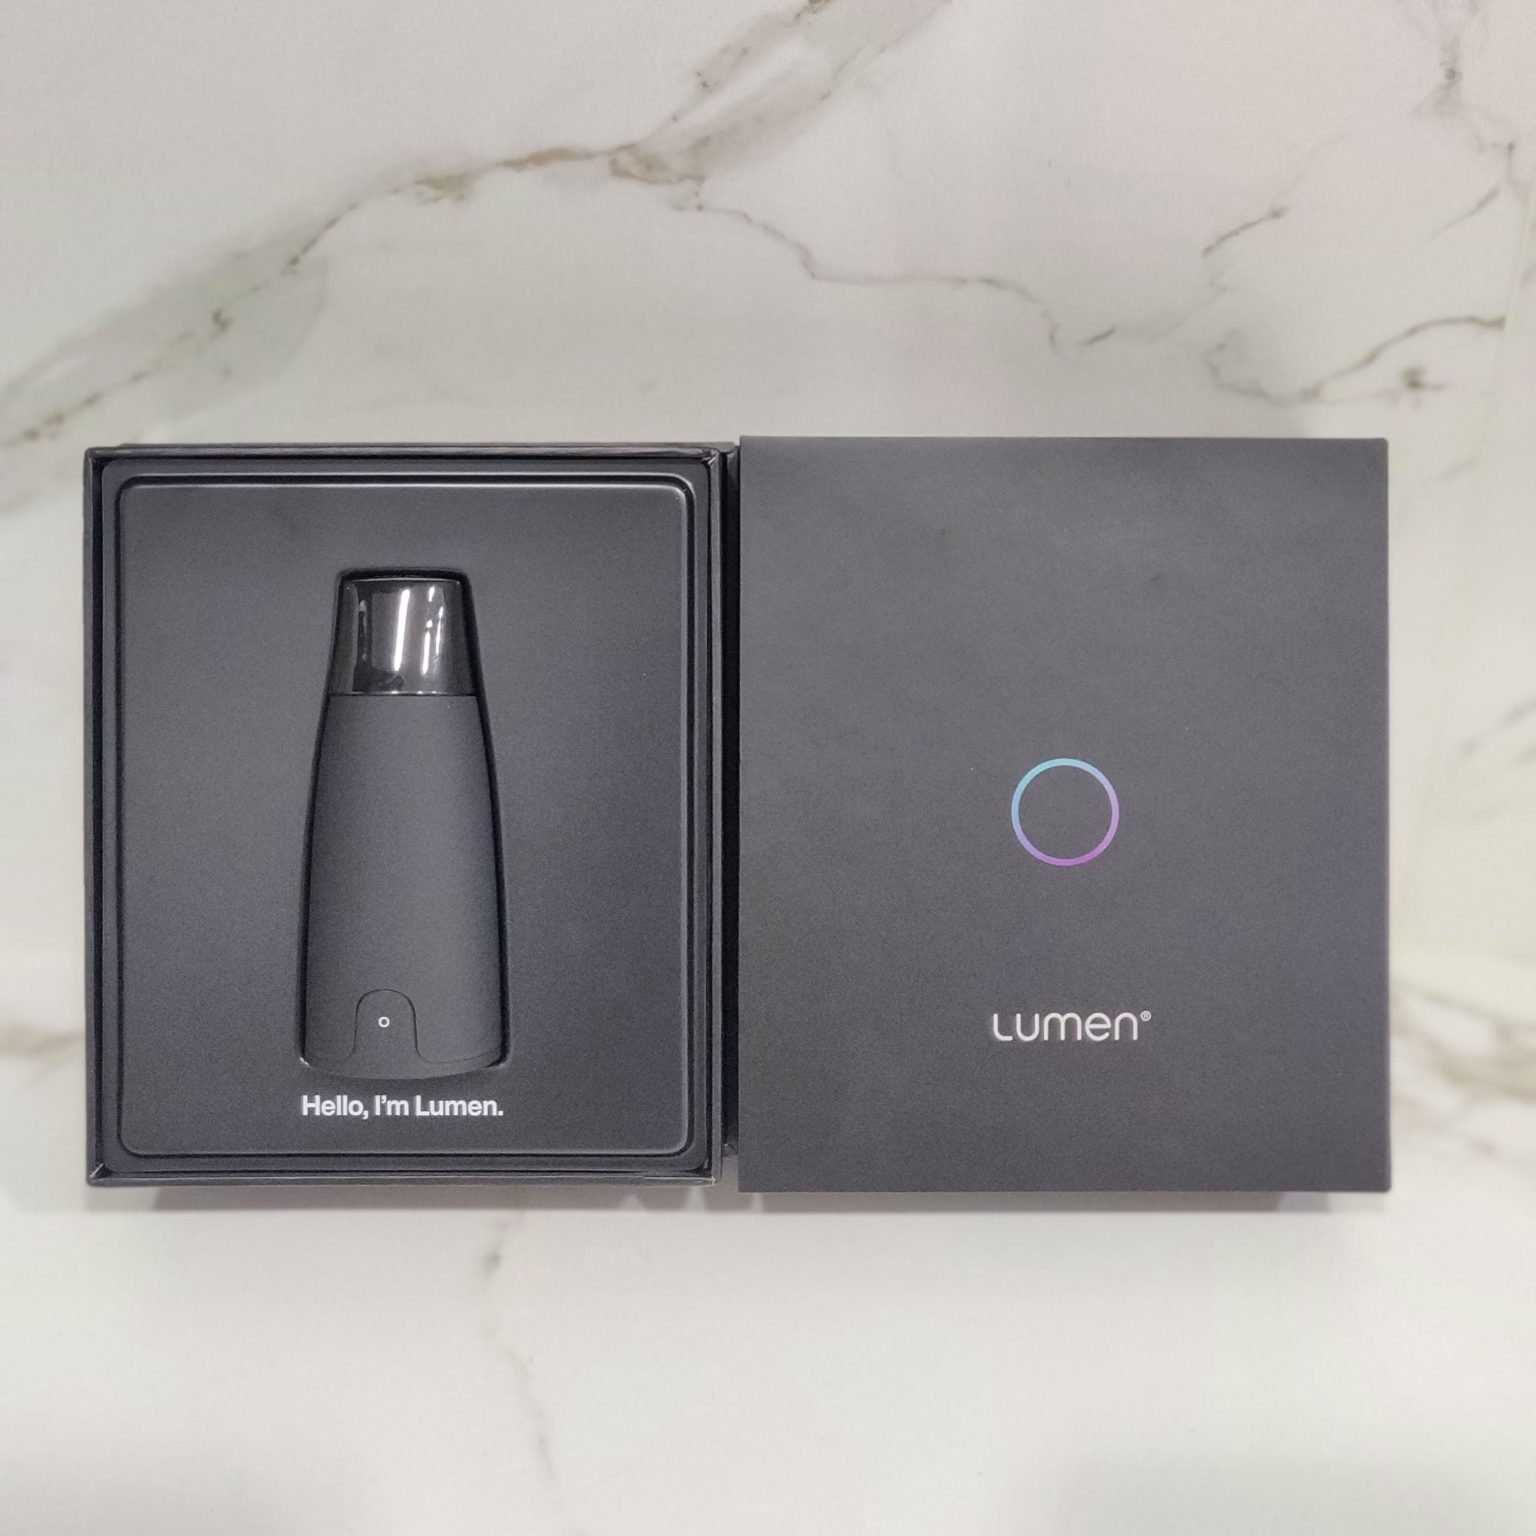 does lumen work without subscription